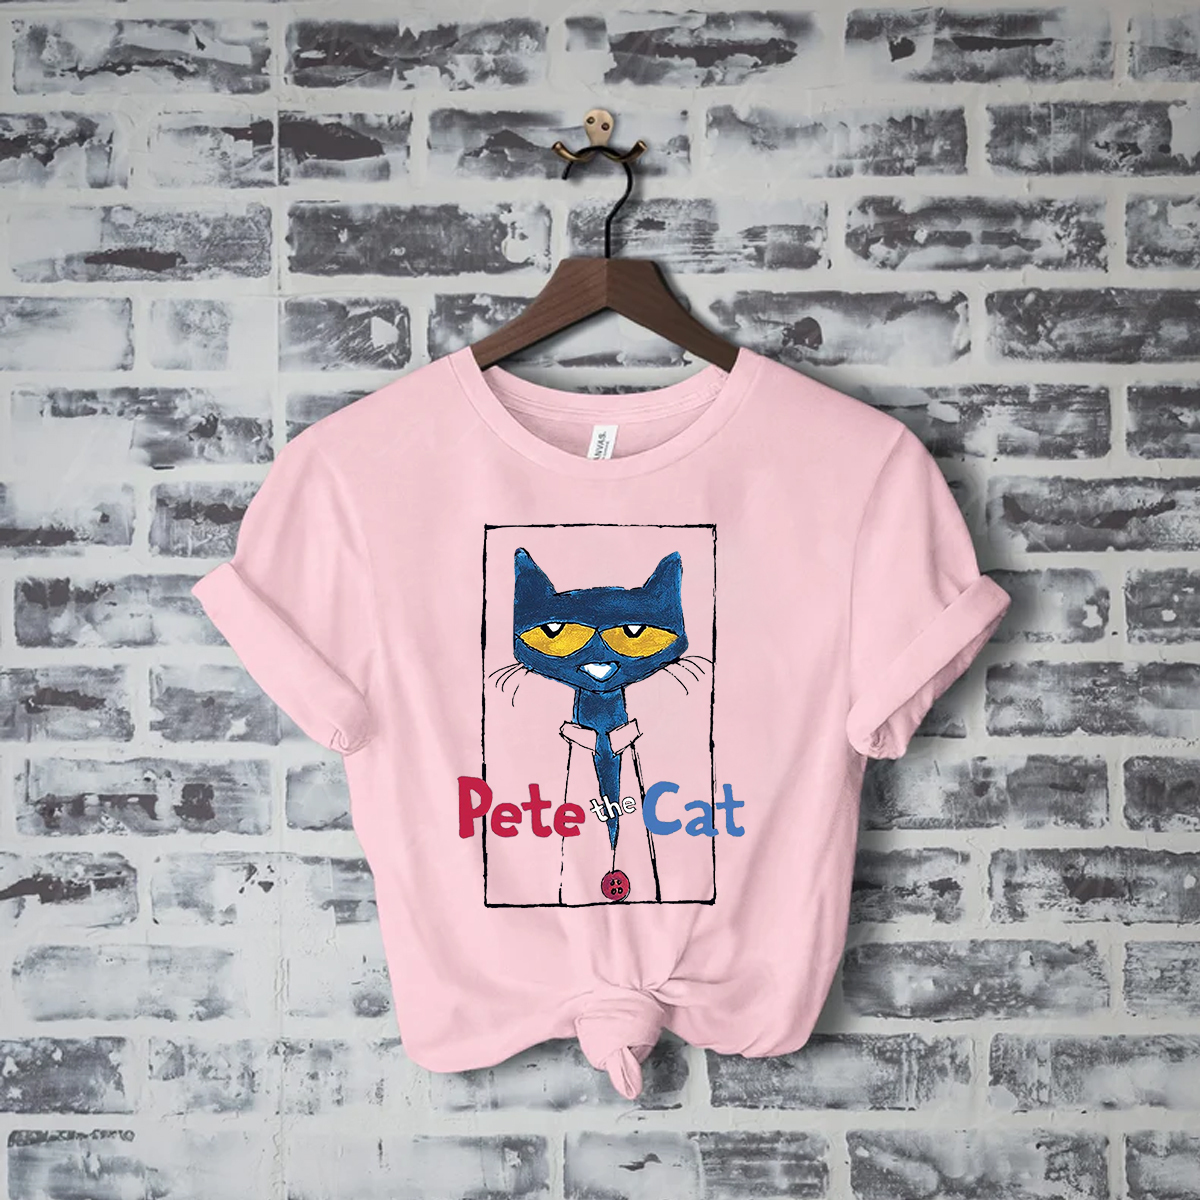 Pete the cat shirt, Pete the cat Groovy shirt, Blue Cat T-Shirt, Cool cat shirt, birthday party, Baby, kids and adult sizing, kid shirt